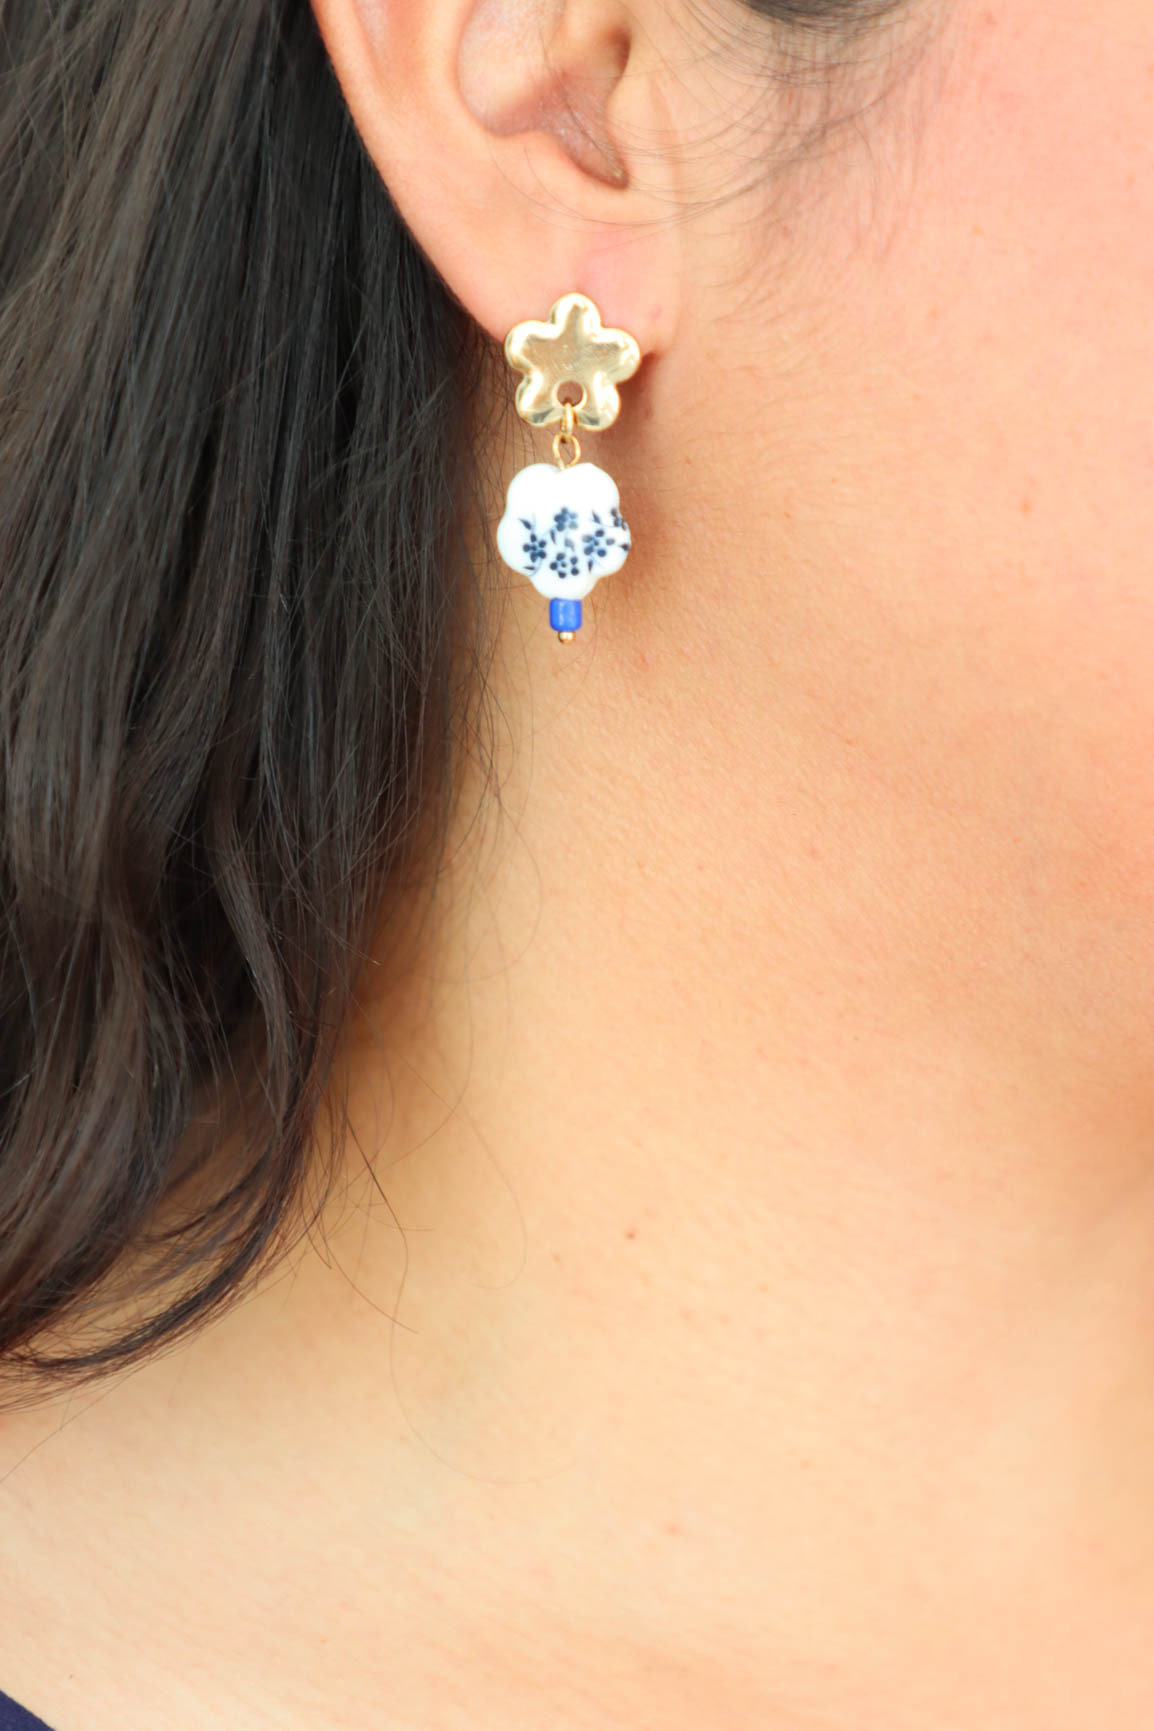 girl wearing gold earrings with white and blue porcelain charm